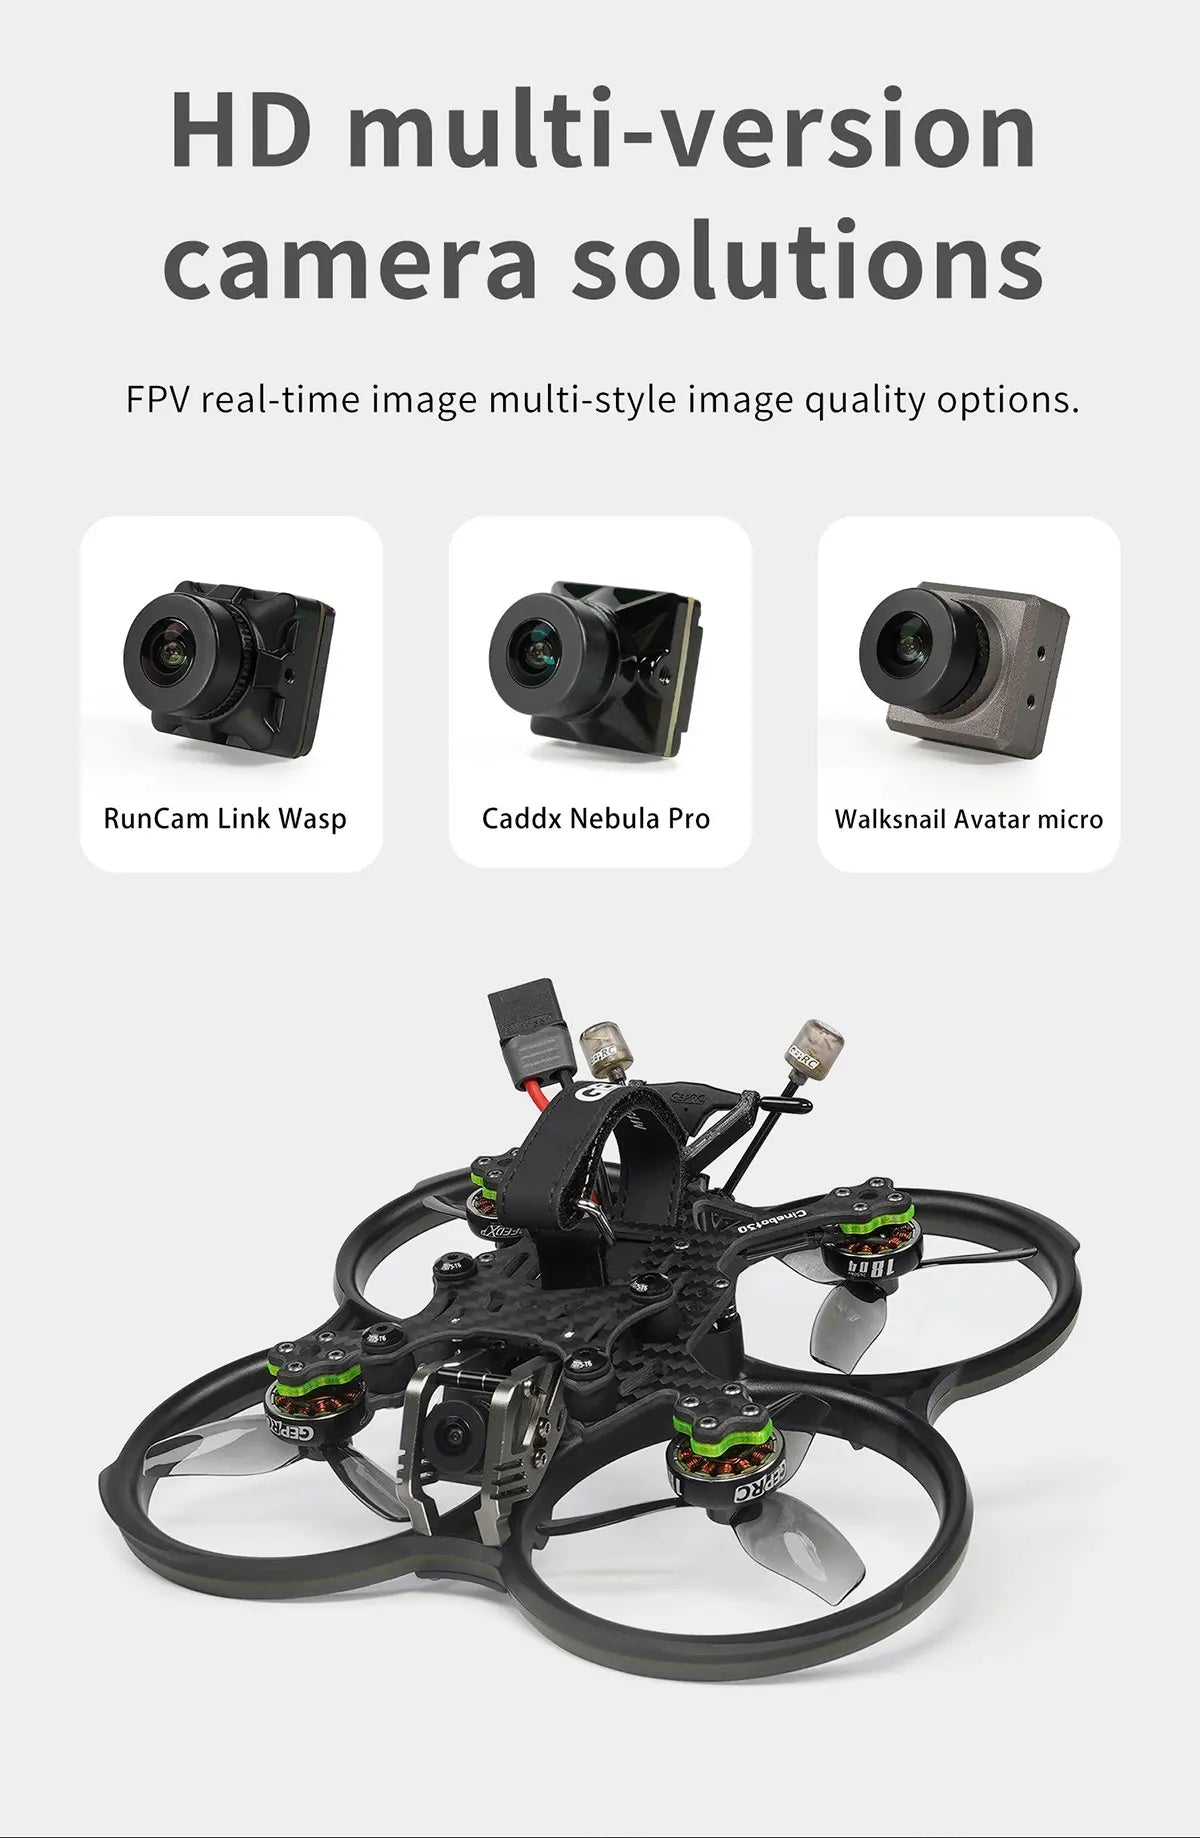 GEPRC Cinebot 30 FPV Drone, HD multi-version camera solutions FPV real-time image quality options . RunC